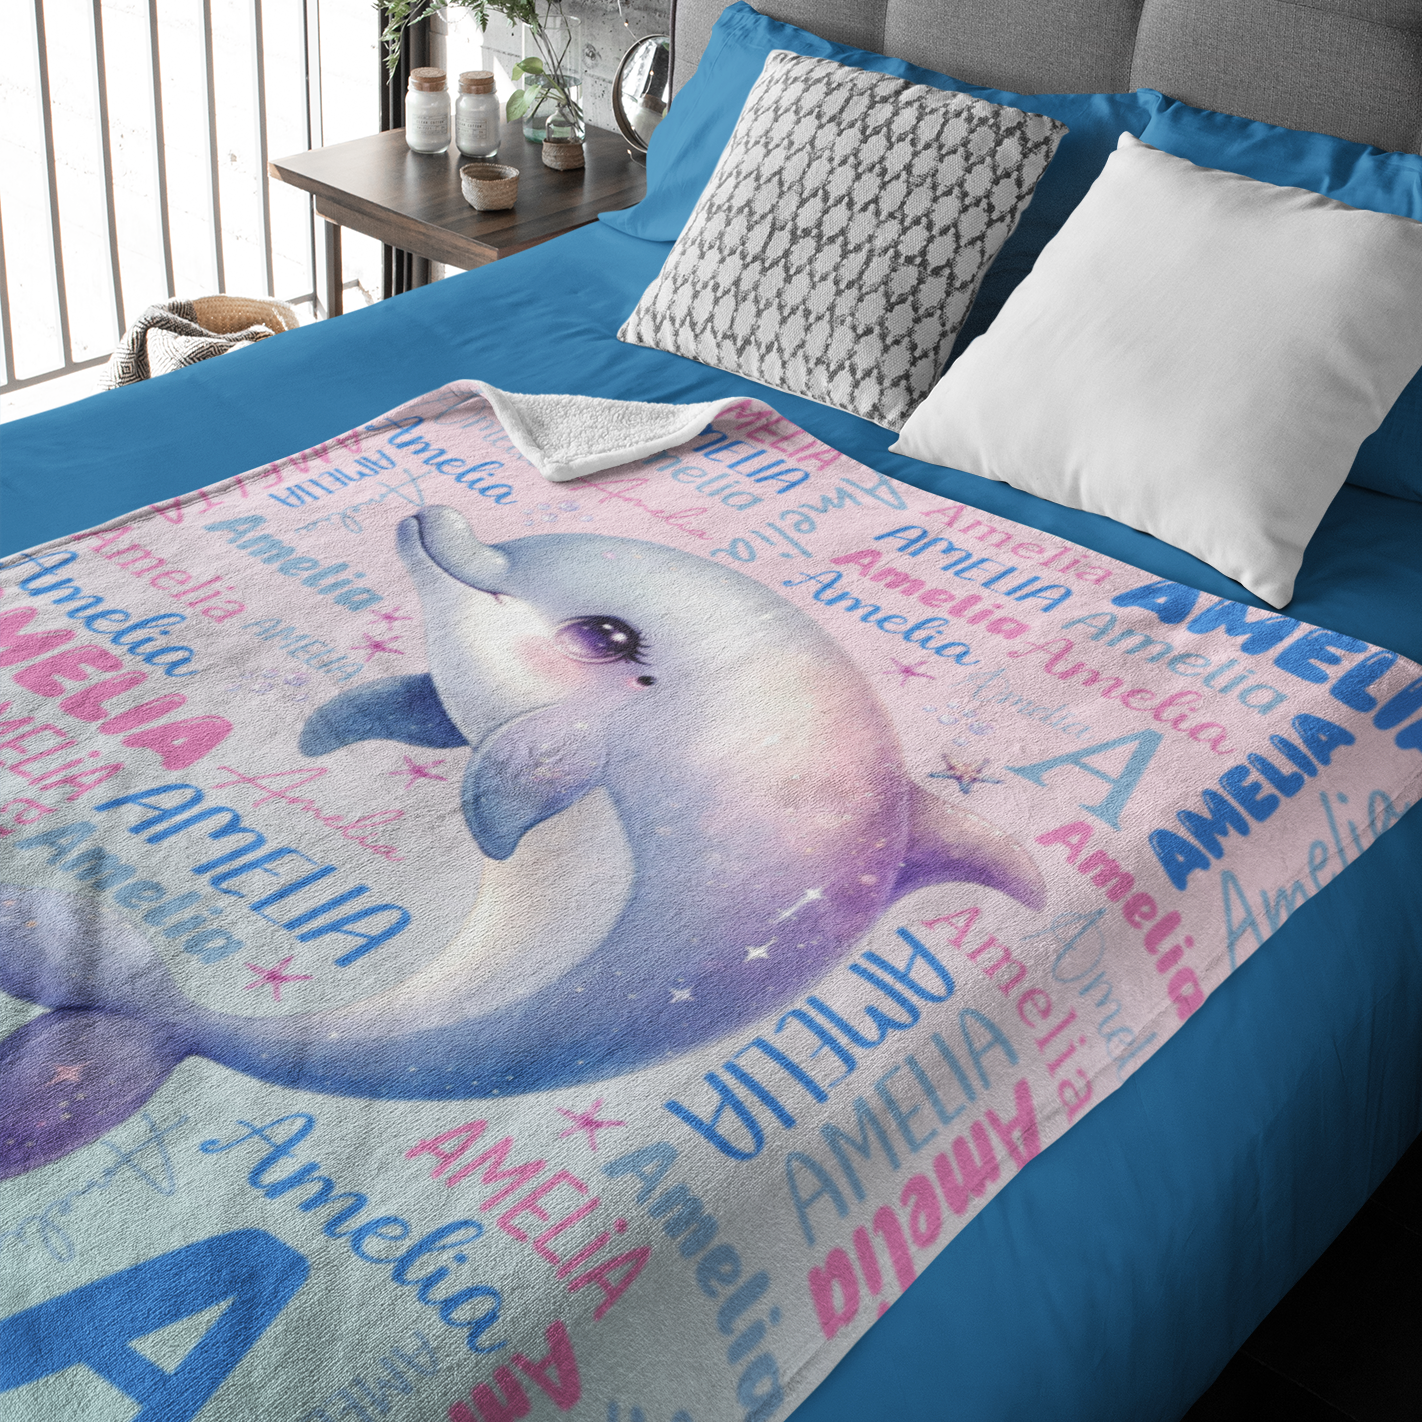 Personalized Watercolor Dolphin Kids Name Blanket - Gift for Kids